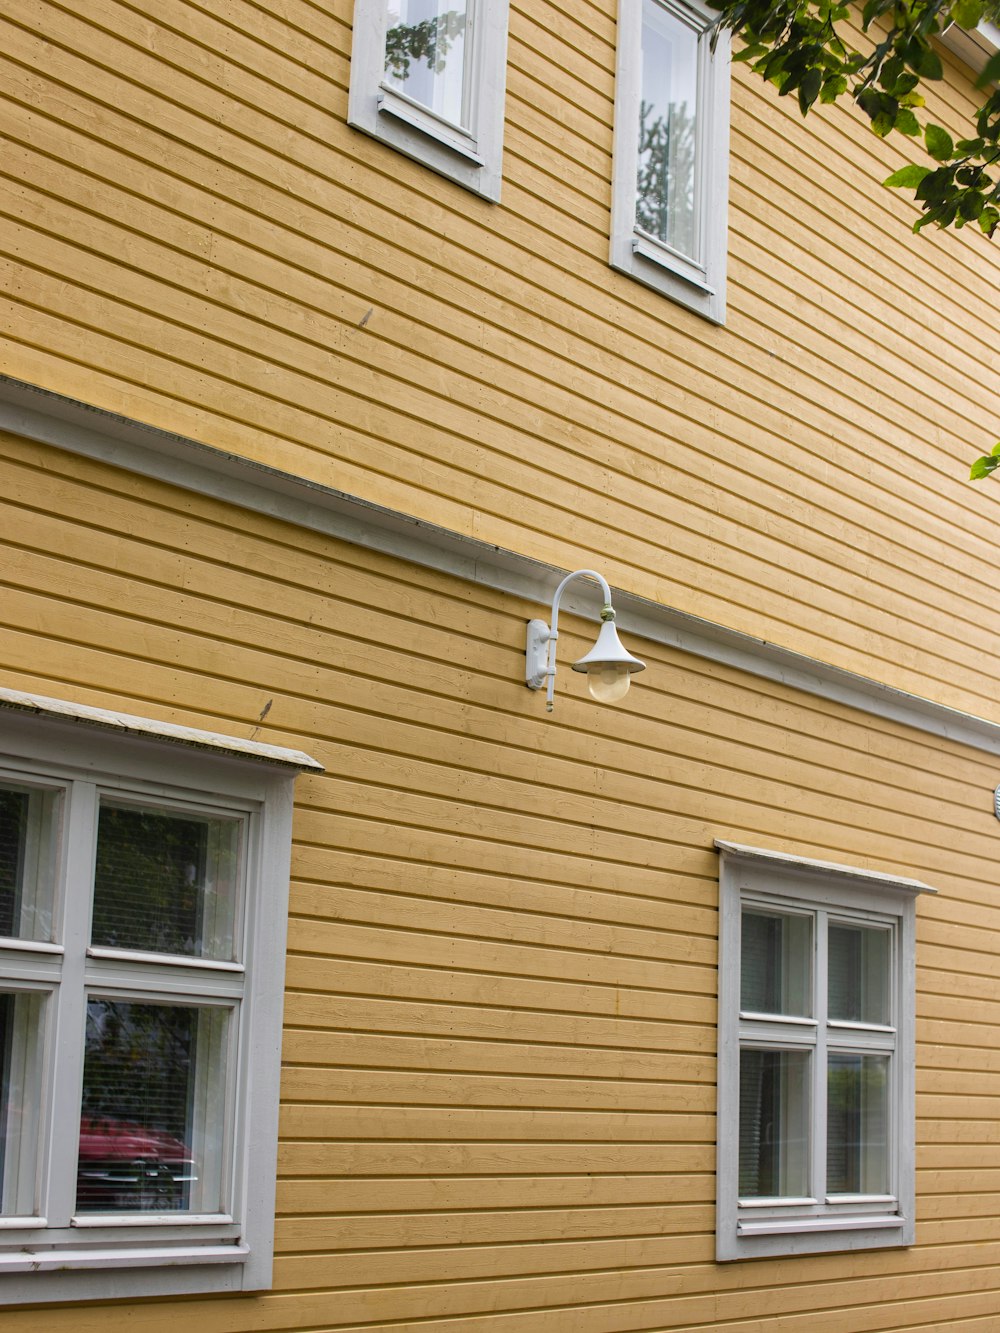 a yellow building with two windows and a street sign